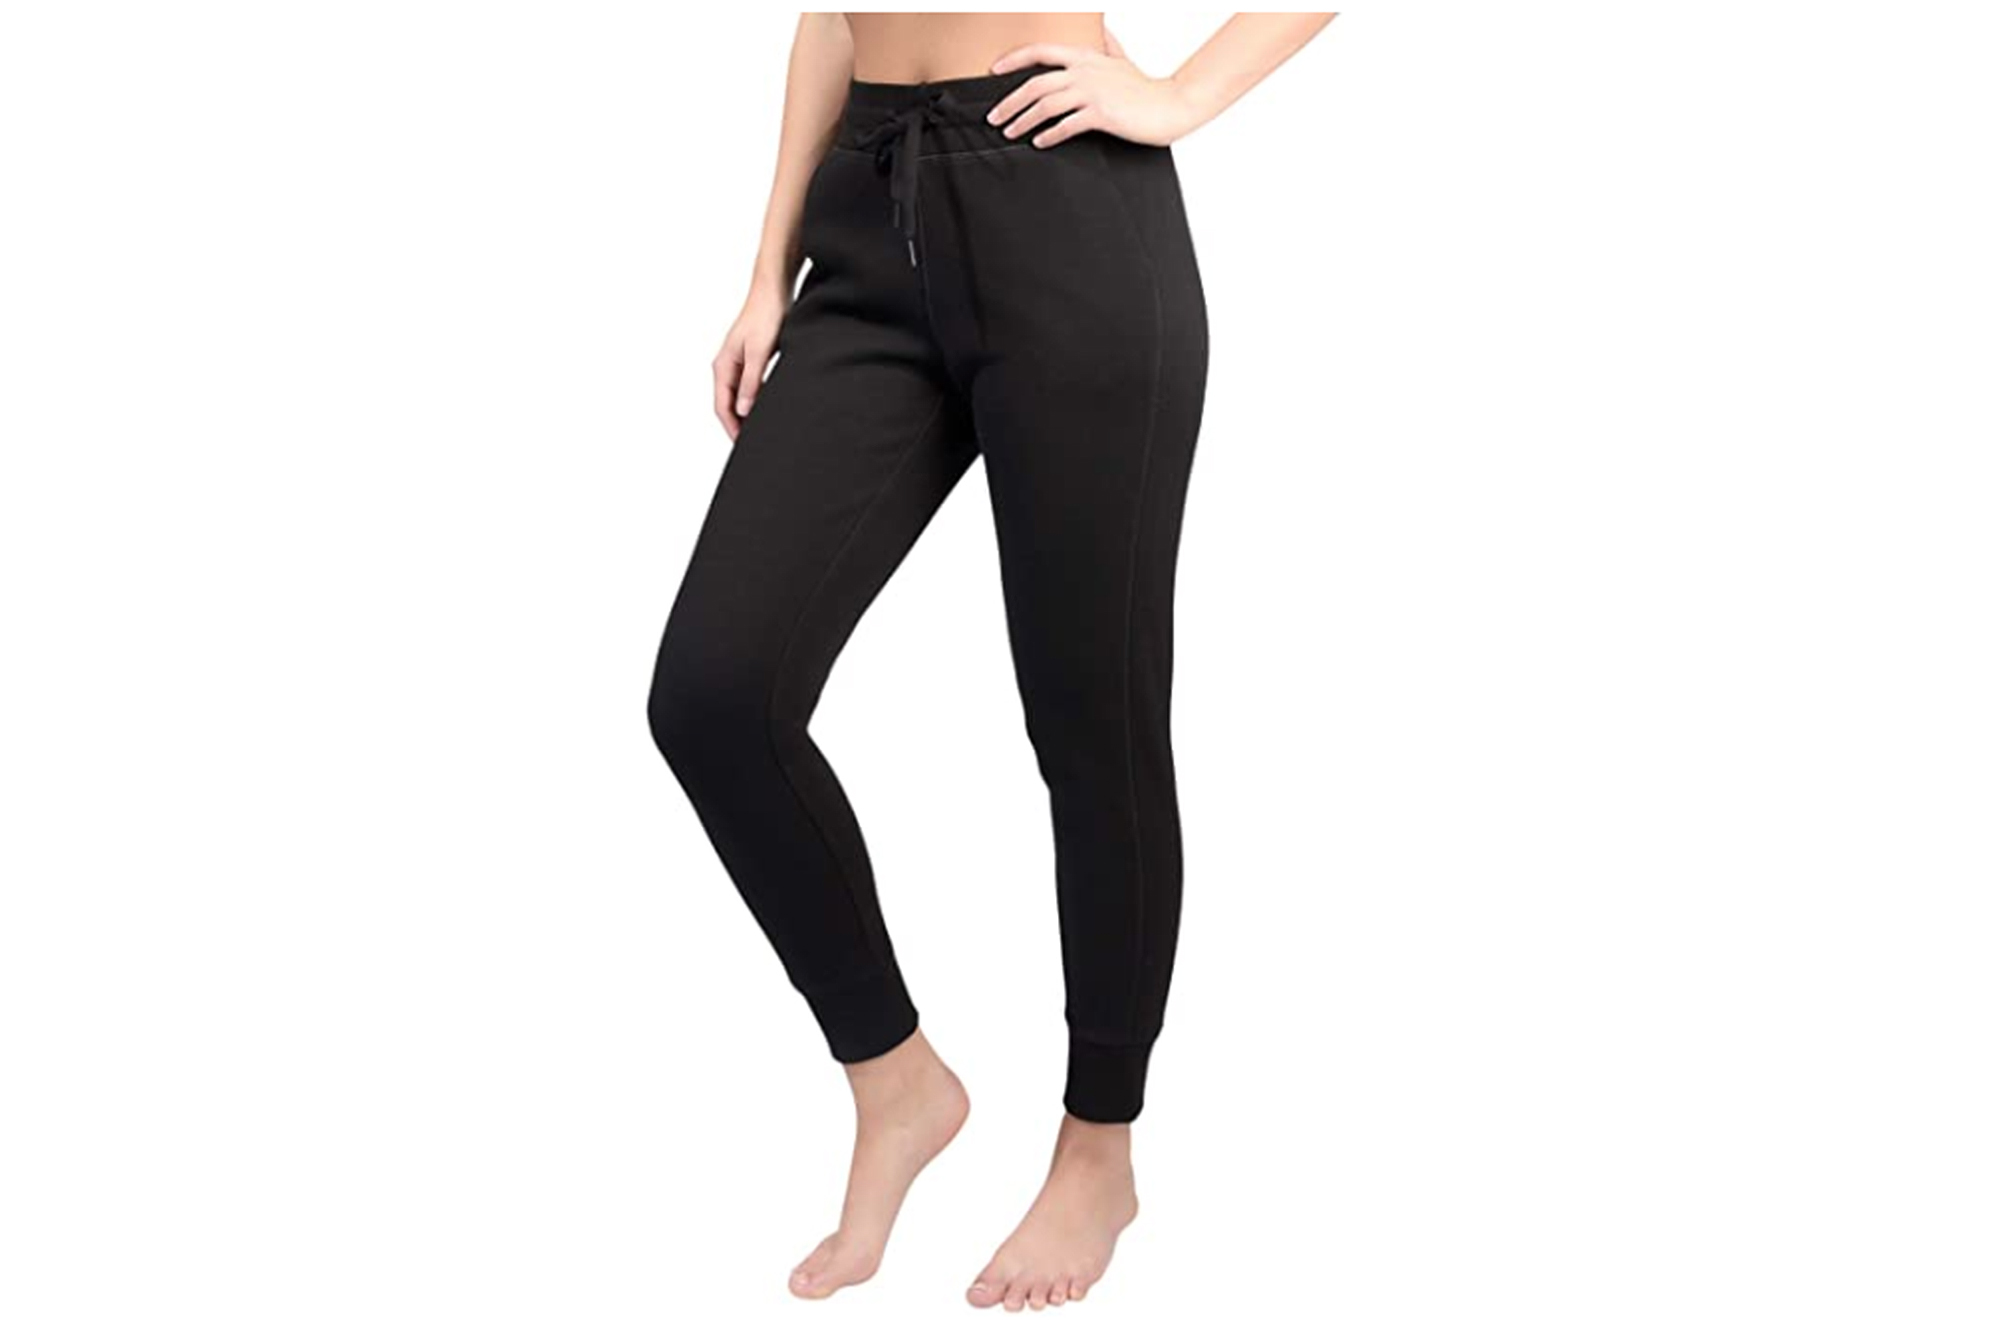 90 Degree By Reflex Lightweight Athletic Pants for Women